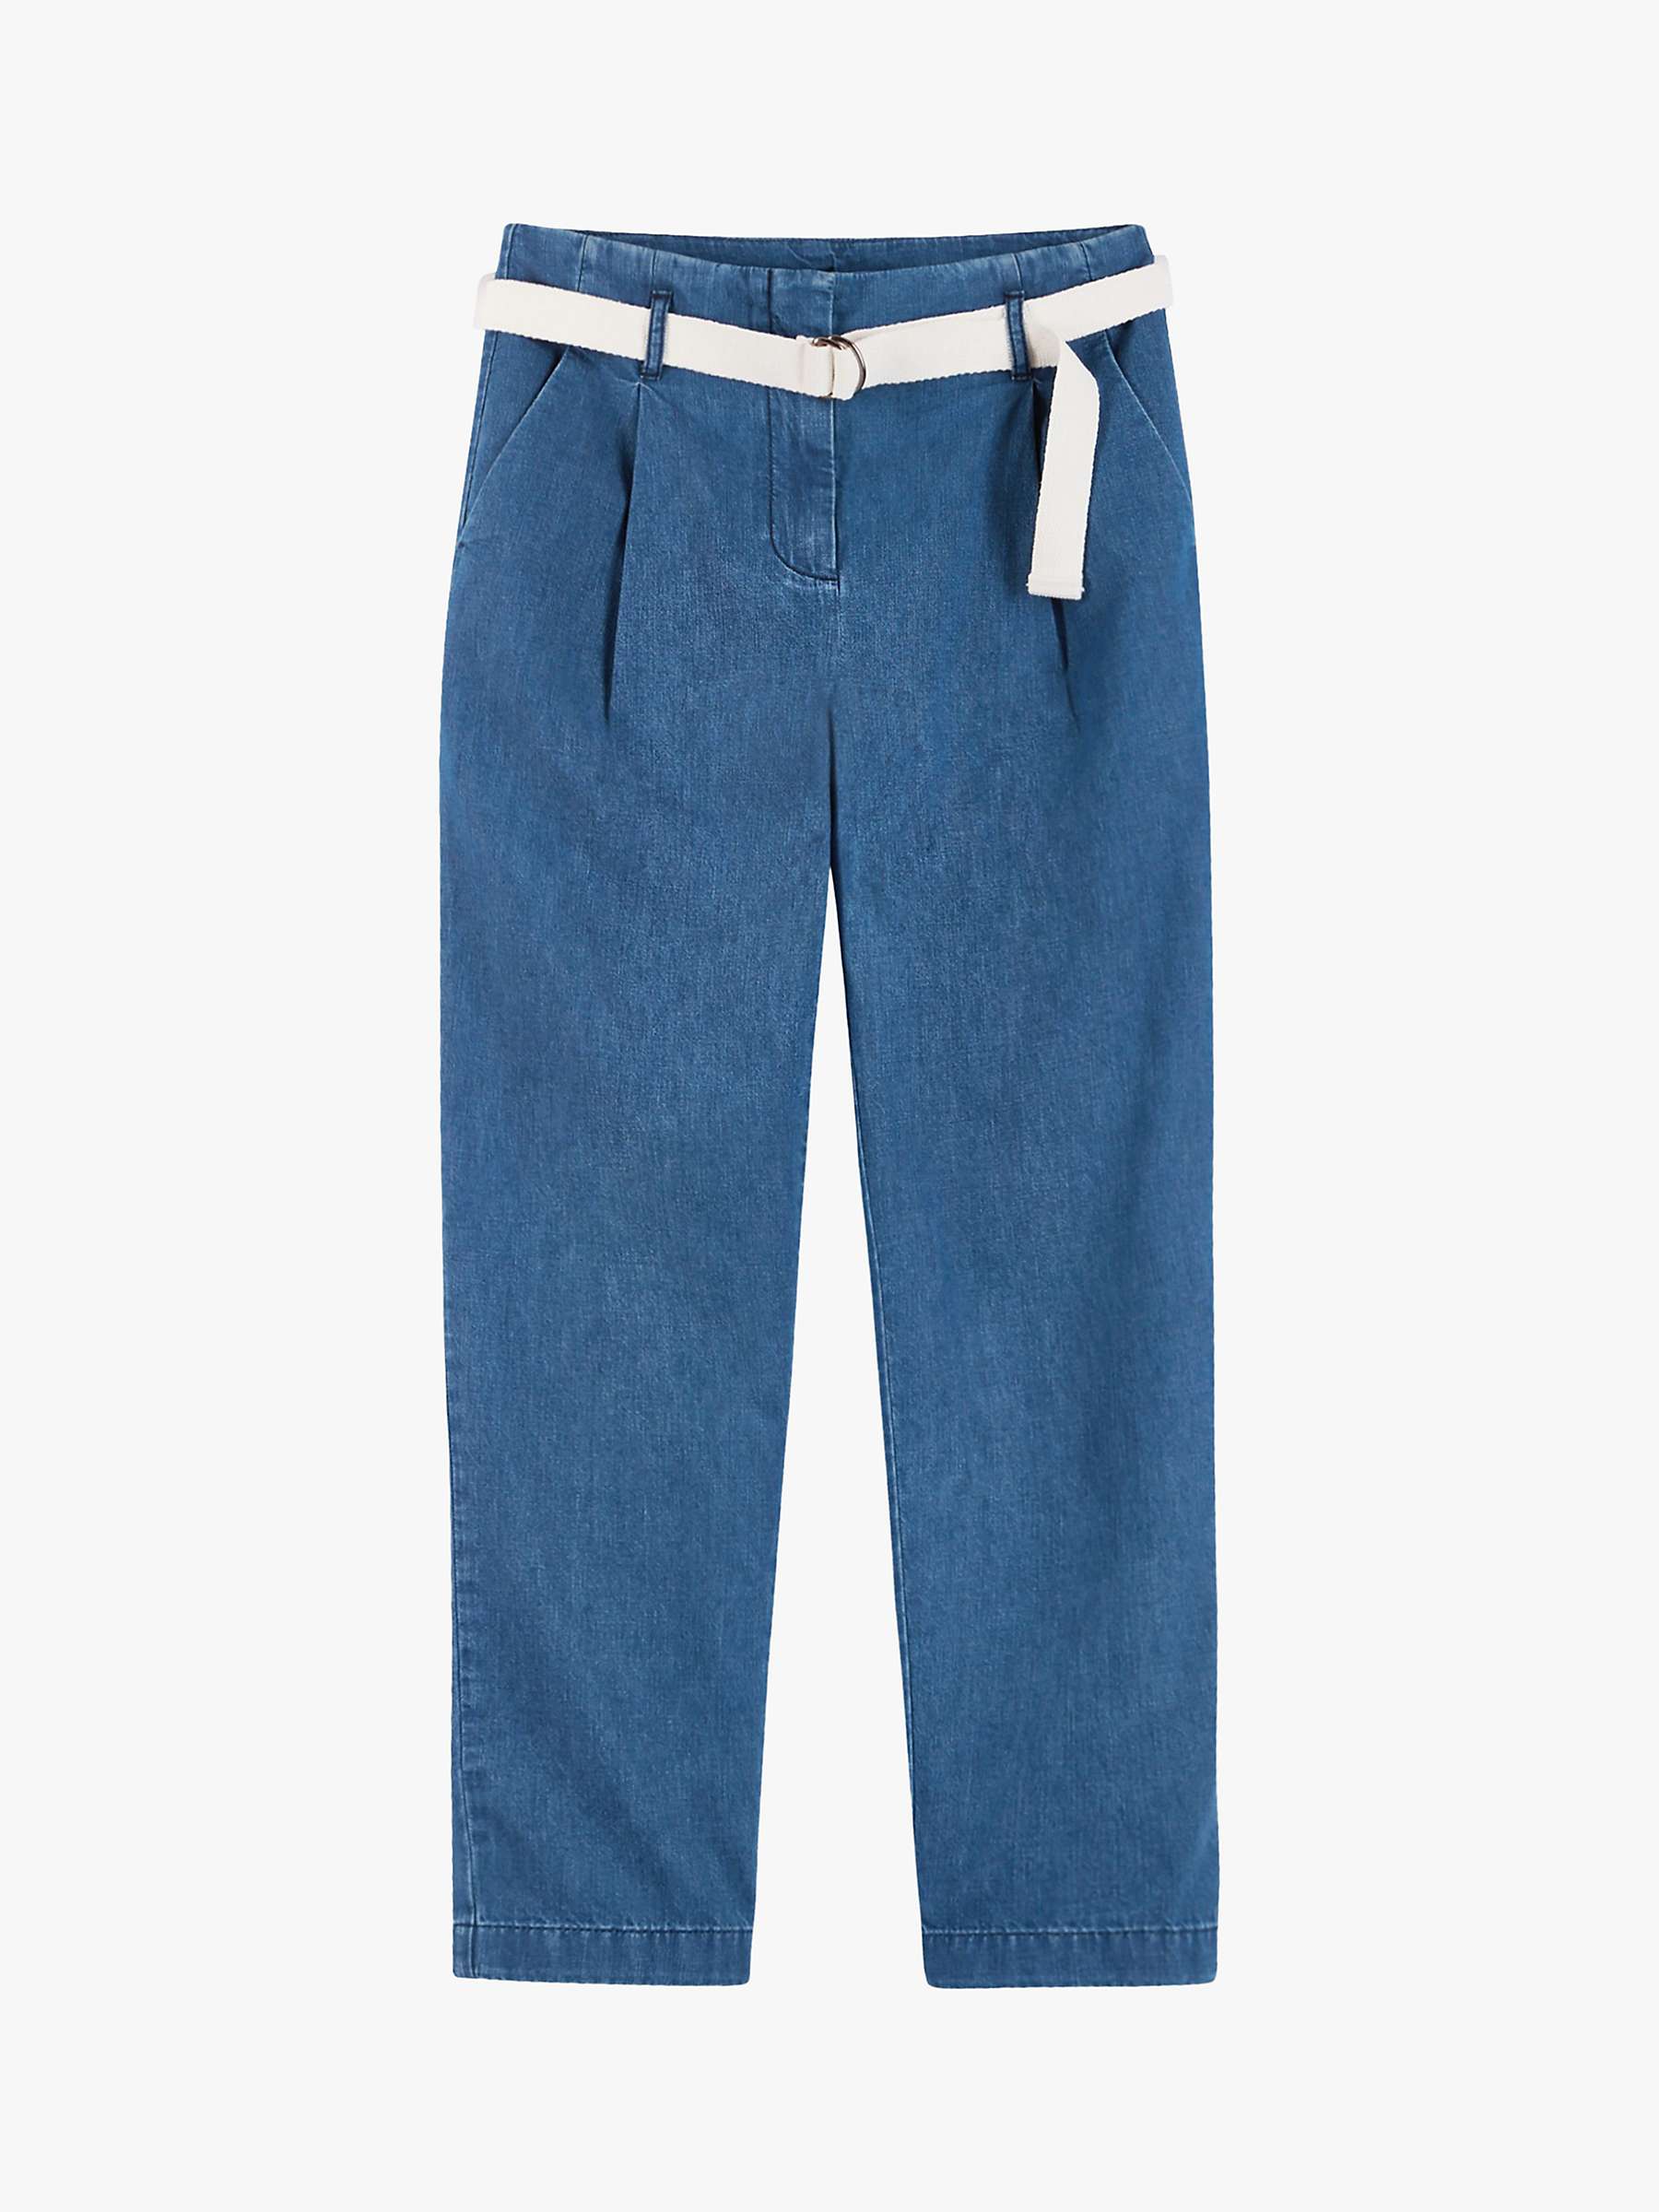 Buy hush Pleat Chambray Trousers, Light Blue Online at johnlewis.com